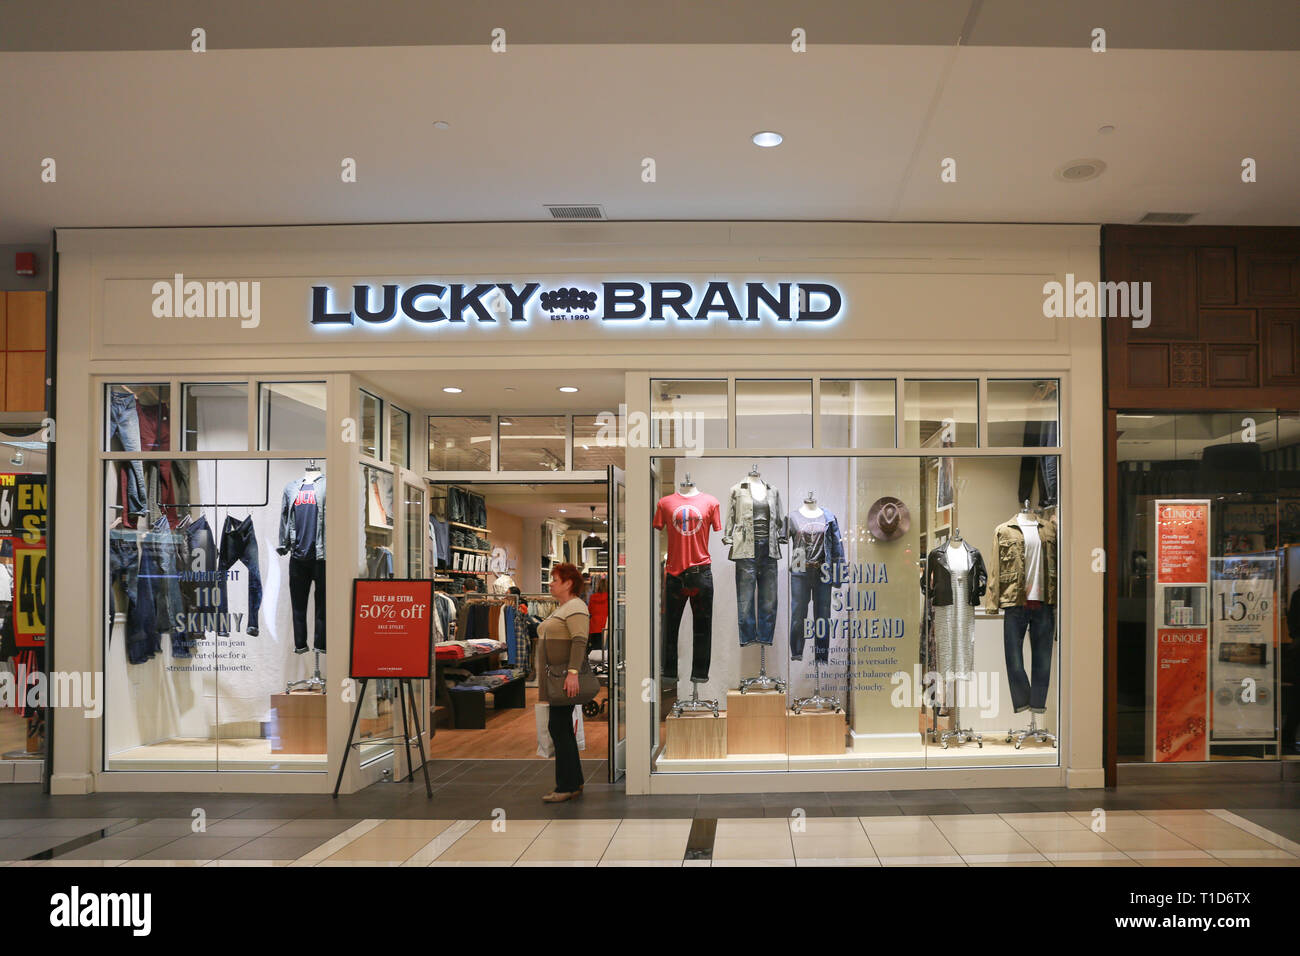 https://c8.alamy.com/comp/T1D6TX/lawrence-township-new-jersey-february-24-2019lucky-brand-store-front-at-quaker-bridge-shopping-mall-image-T1D6TX.jpg